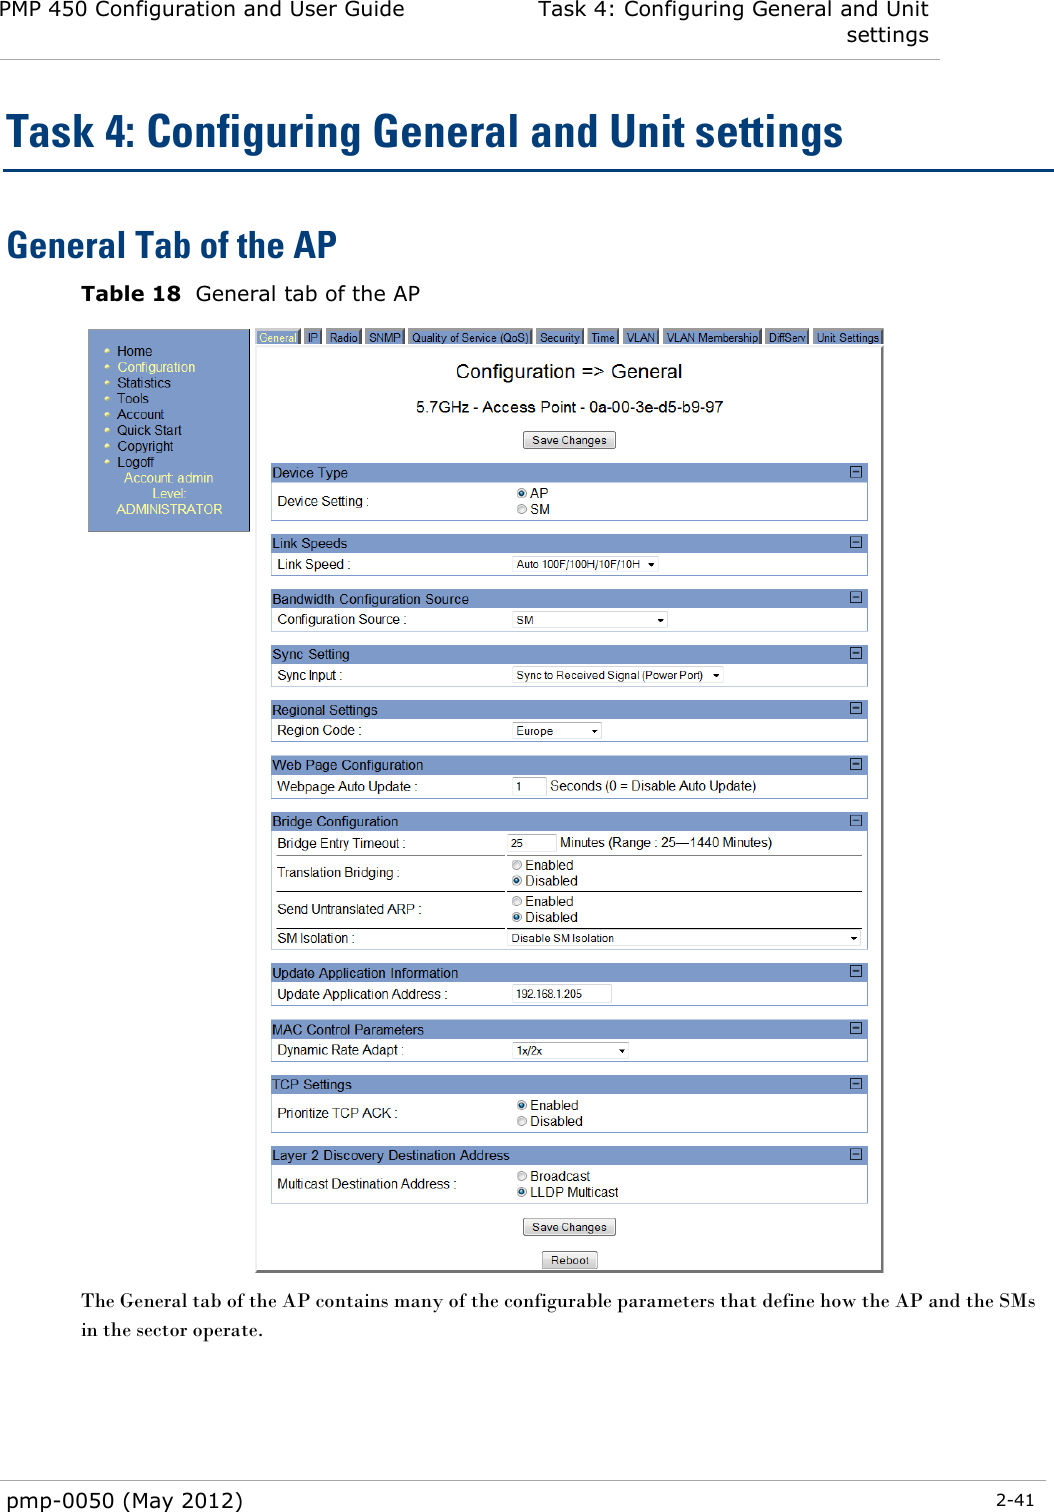 PMP 450 Configuration and User Guide Task 4: Configuring General and Unit settings  pmp-0050 (May 2012)  2-41  Task 4: Configuring General and Unit settings General Tab of the AP Table 18  General tab of the AP  The General tab of the AP contains many of the configurable parameters that define how the AP and the SMs in the sector operate.   